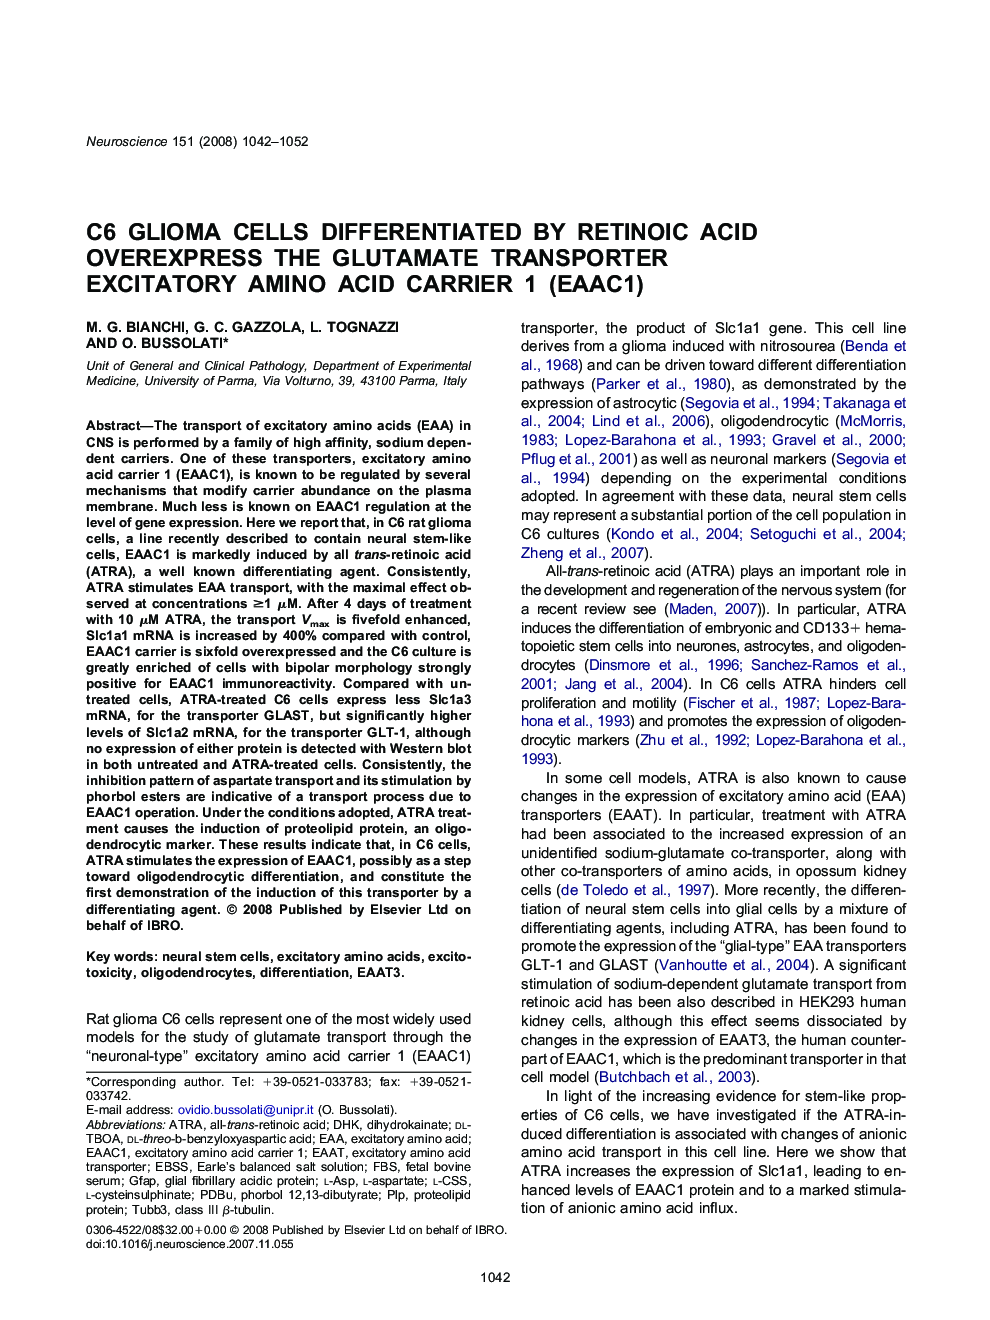 C6 glioma cells differentiated by retinoic acid overexpress the glutamate transporter excitatory amino acid carrier 1 (EAAC1)